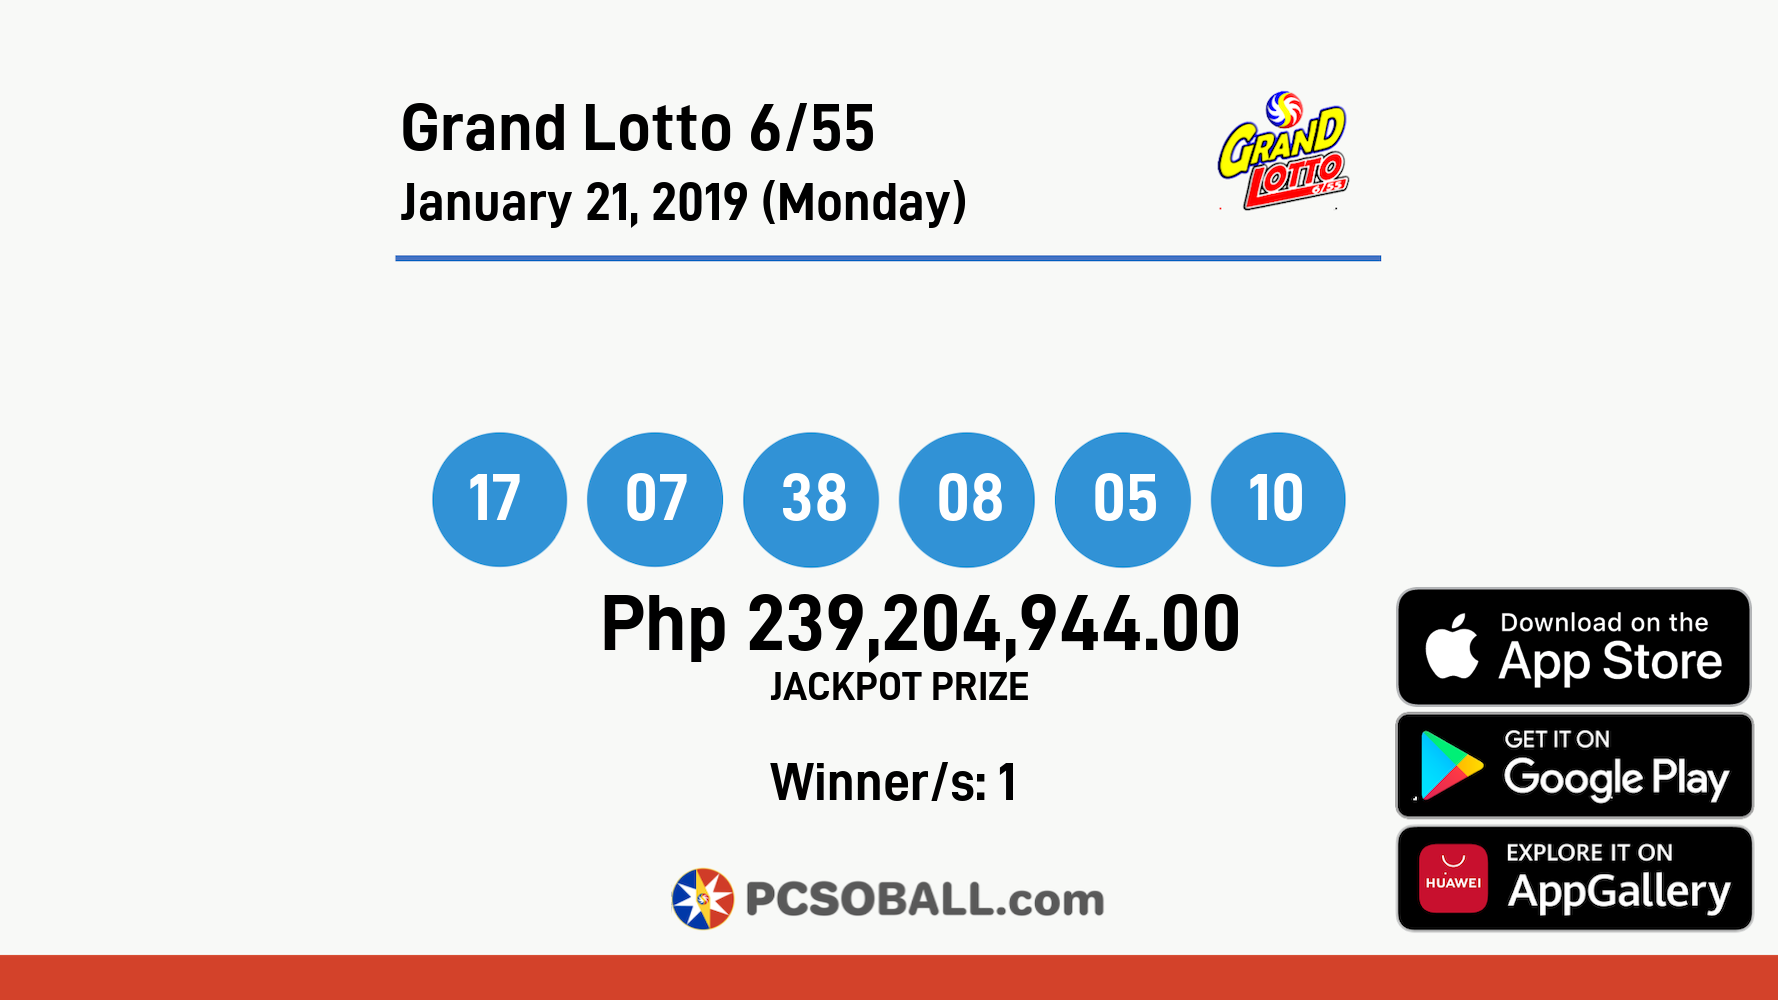 Grand Lotto 6/55 January 21, 2019 (Monday) Result